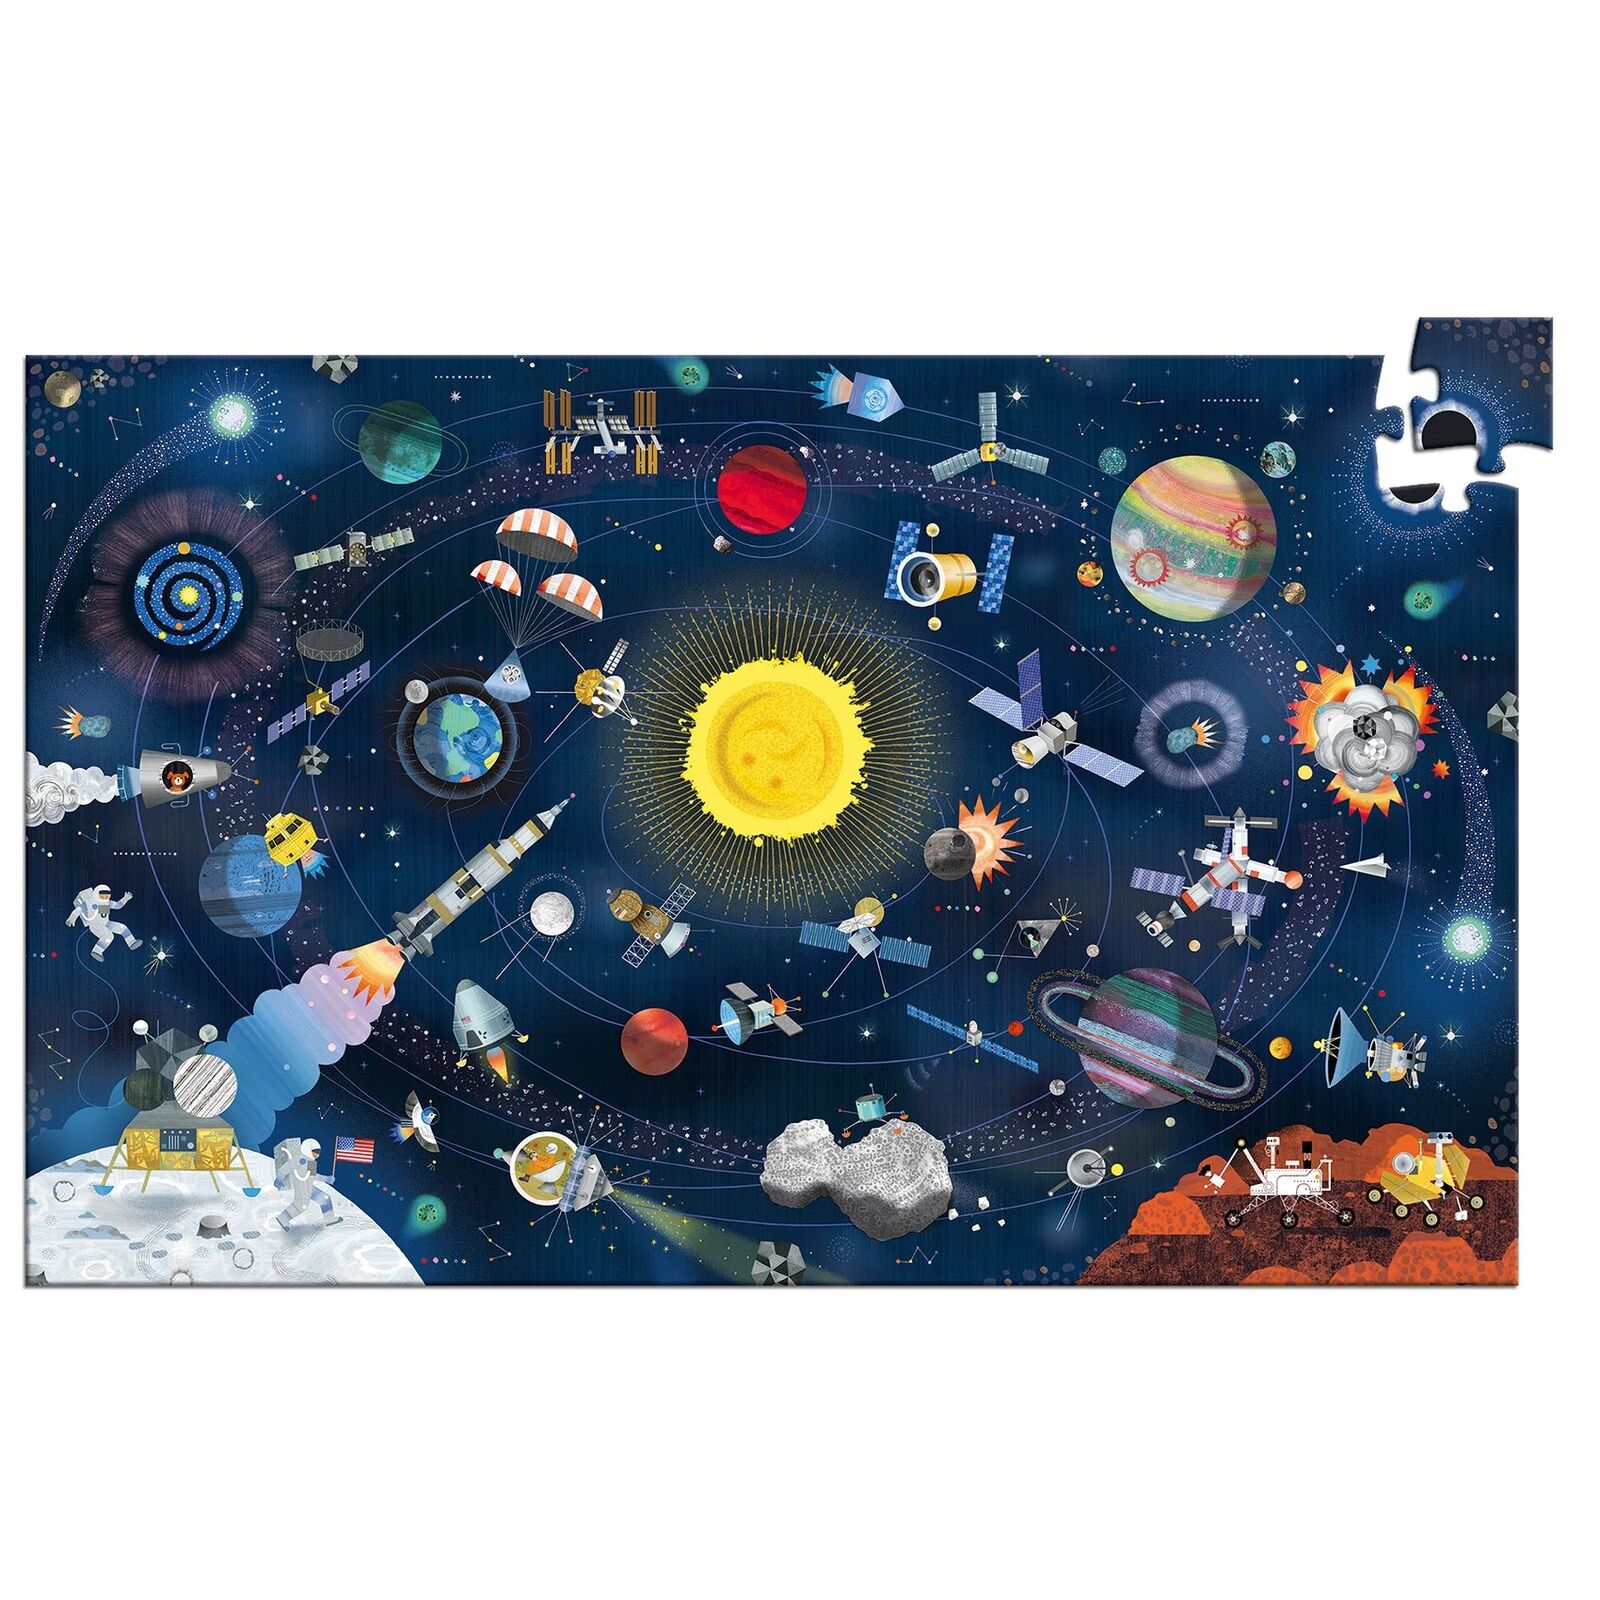 Observation Puzzle - The Space